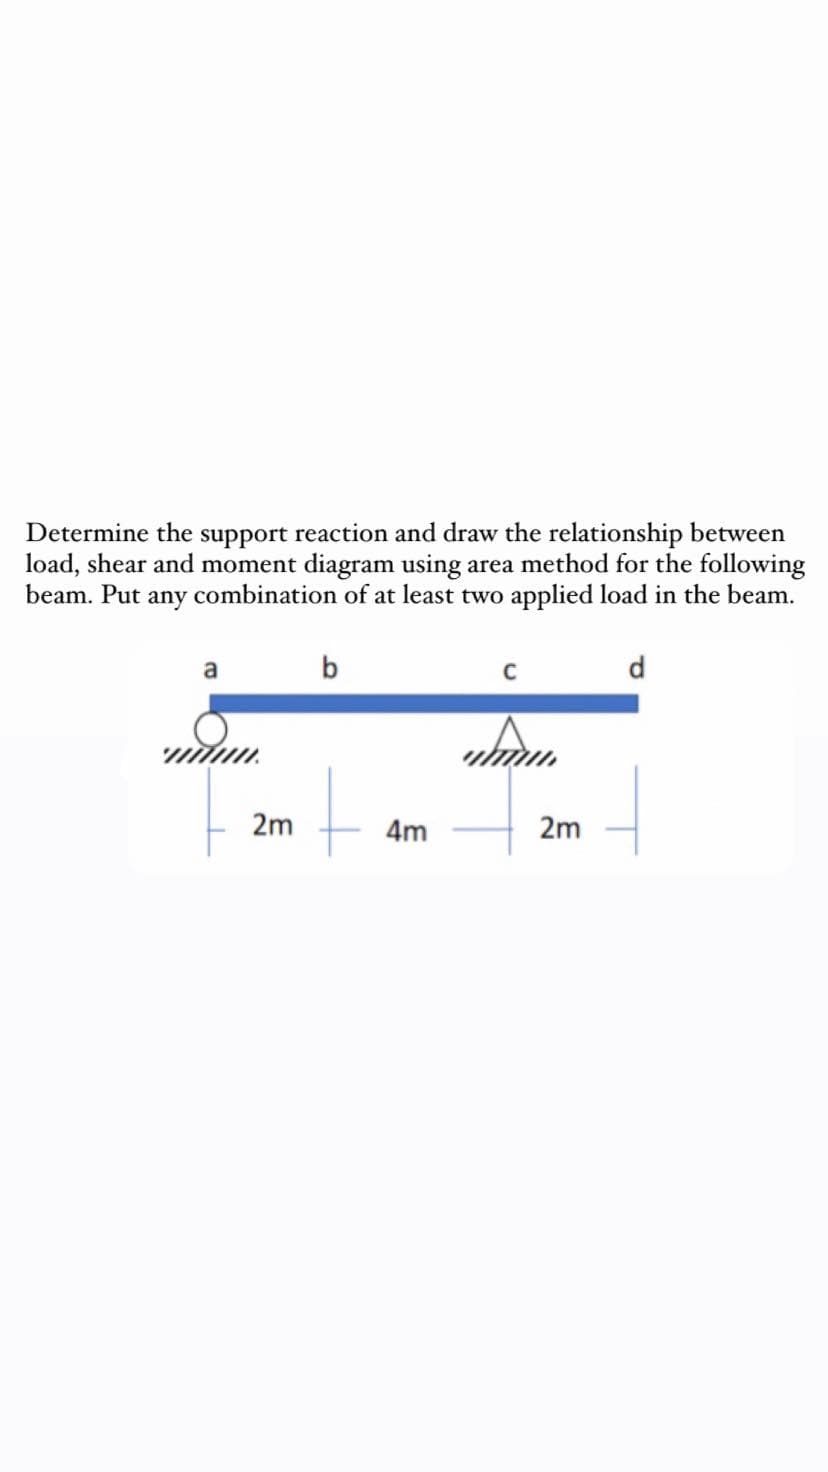 Determine the support reaction and draw the relationship between
load, shear and moment diagram using area method for the following
beam. Put any combination of at least two applied load in the beam.
a
2m
b
4m
uham
2m
d